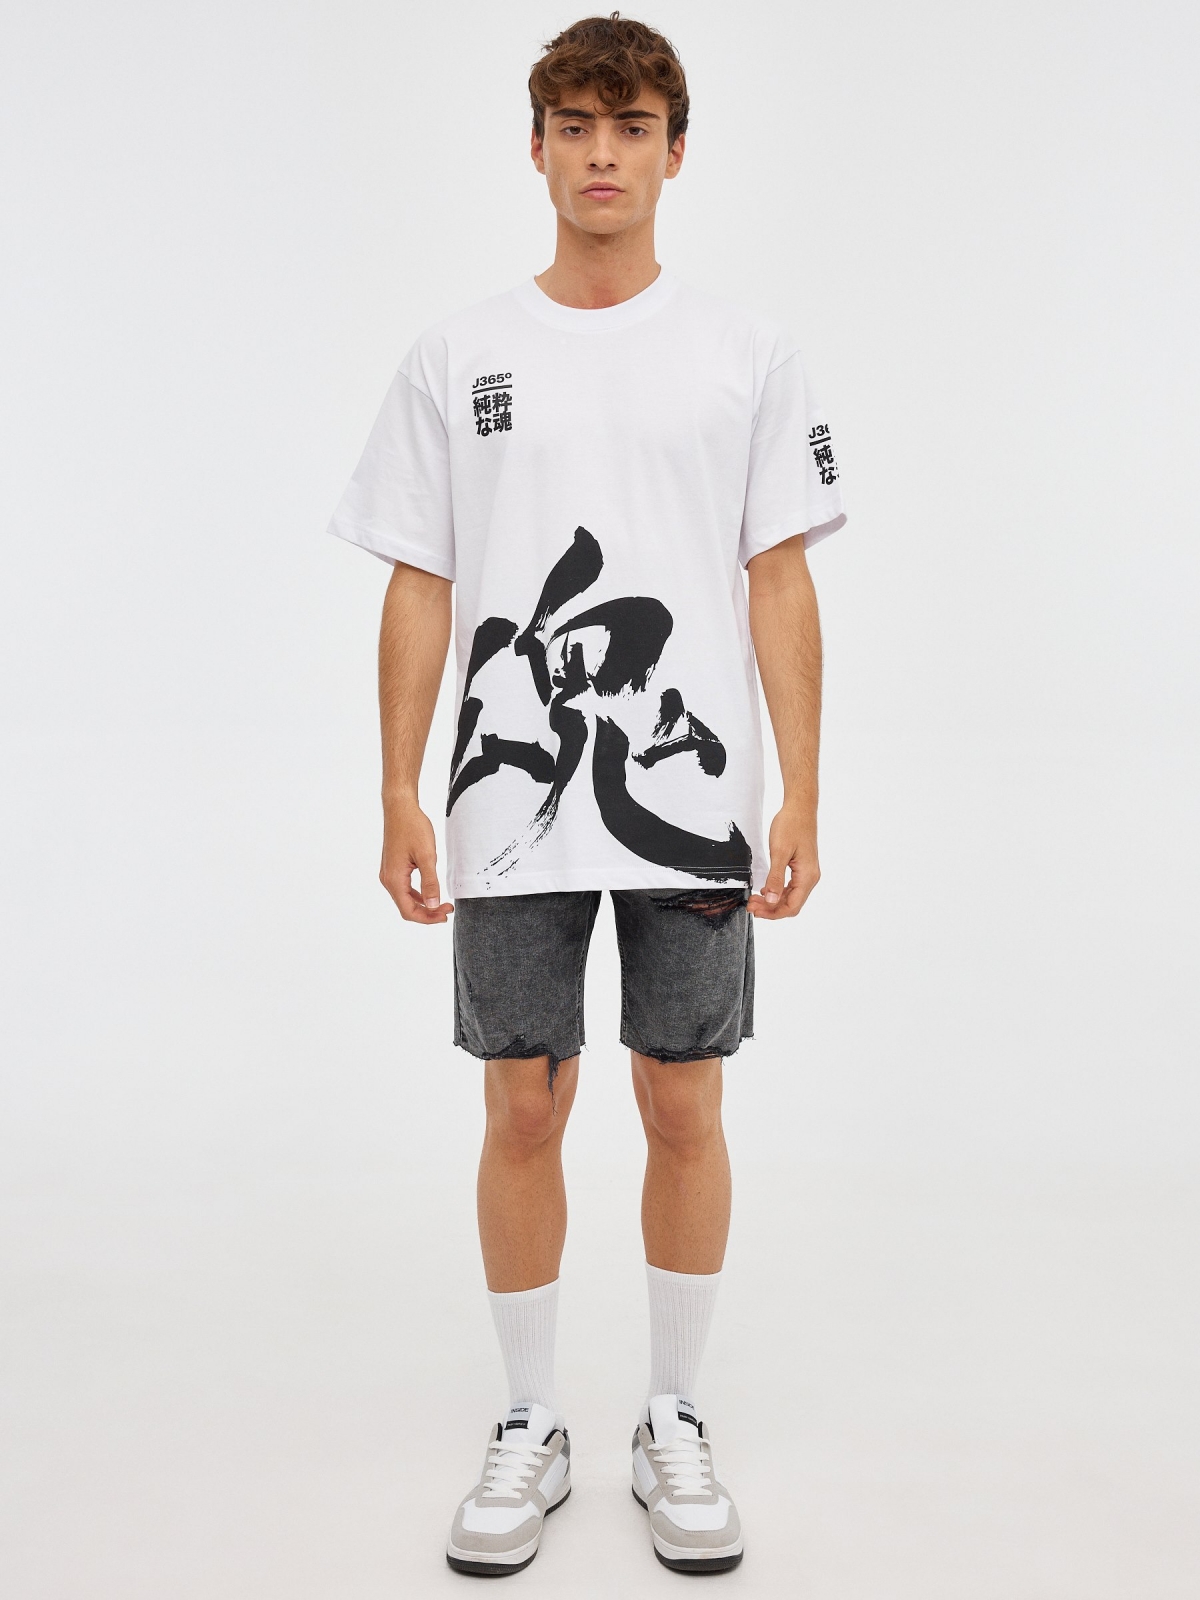 Japanese letter T-shirt white front view